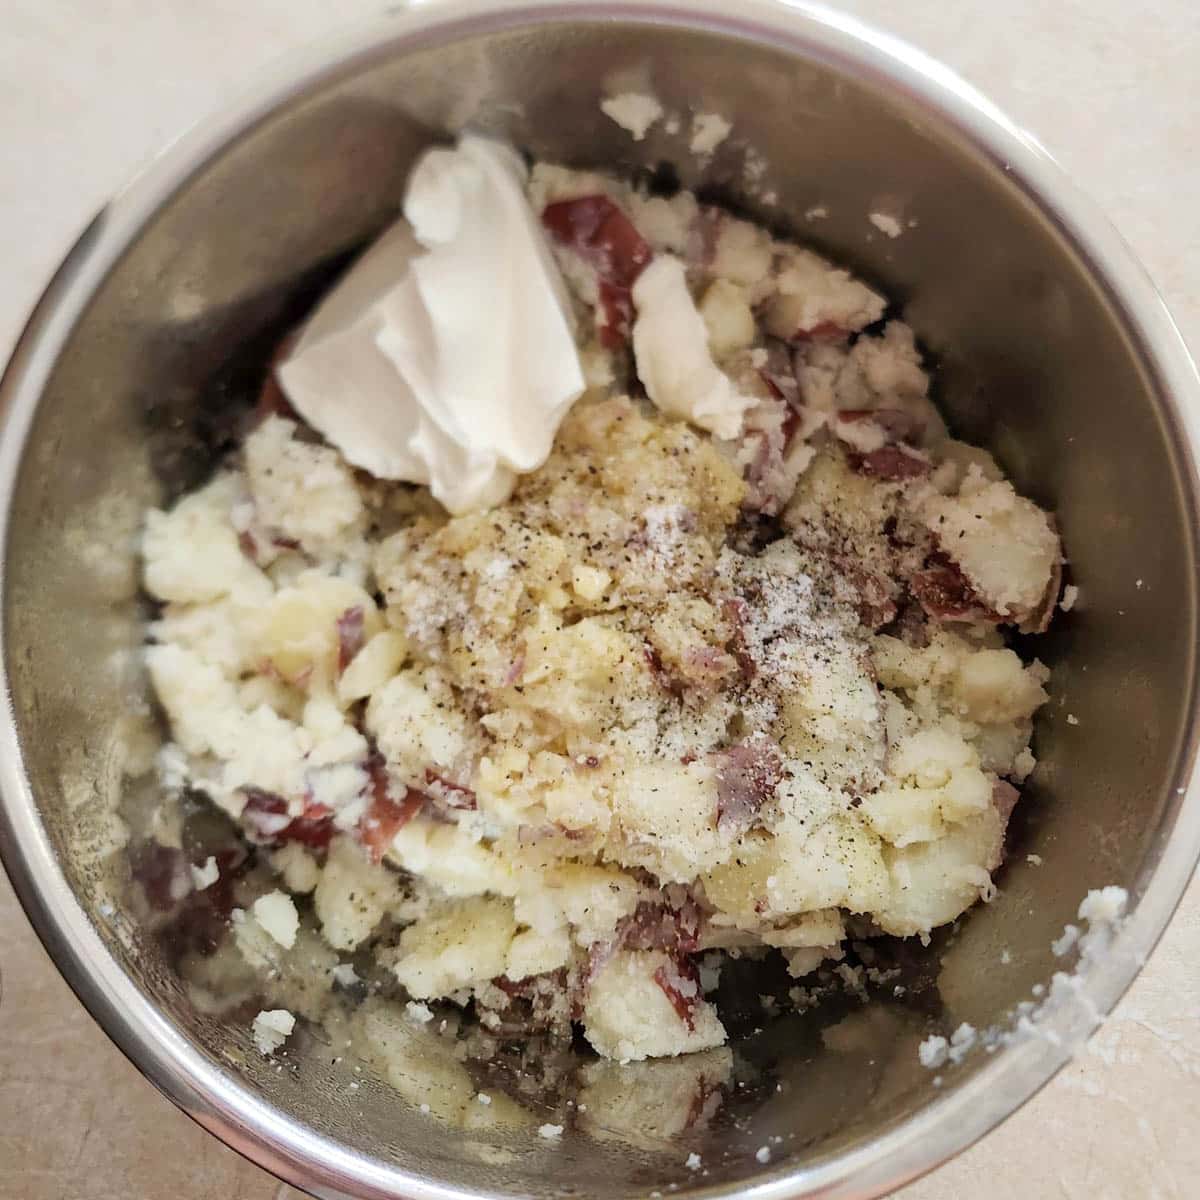 boiled red skin potatoes with sour cream, half and half, butter, shallots and garlic in a bowl